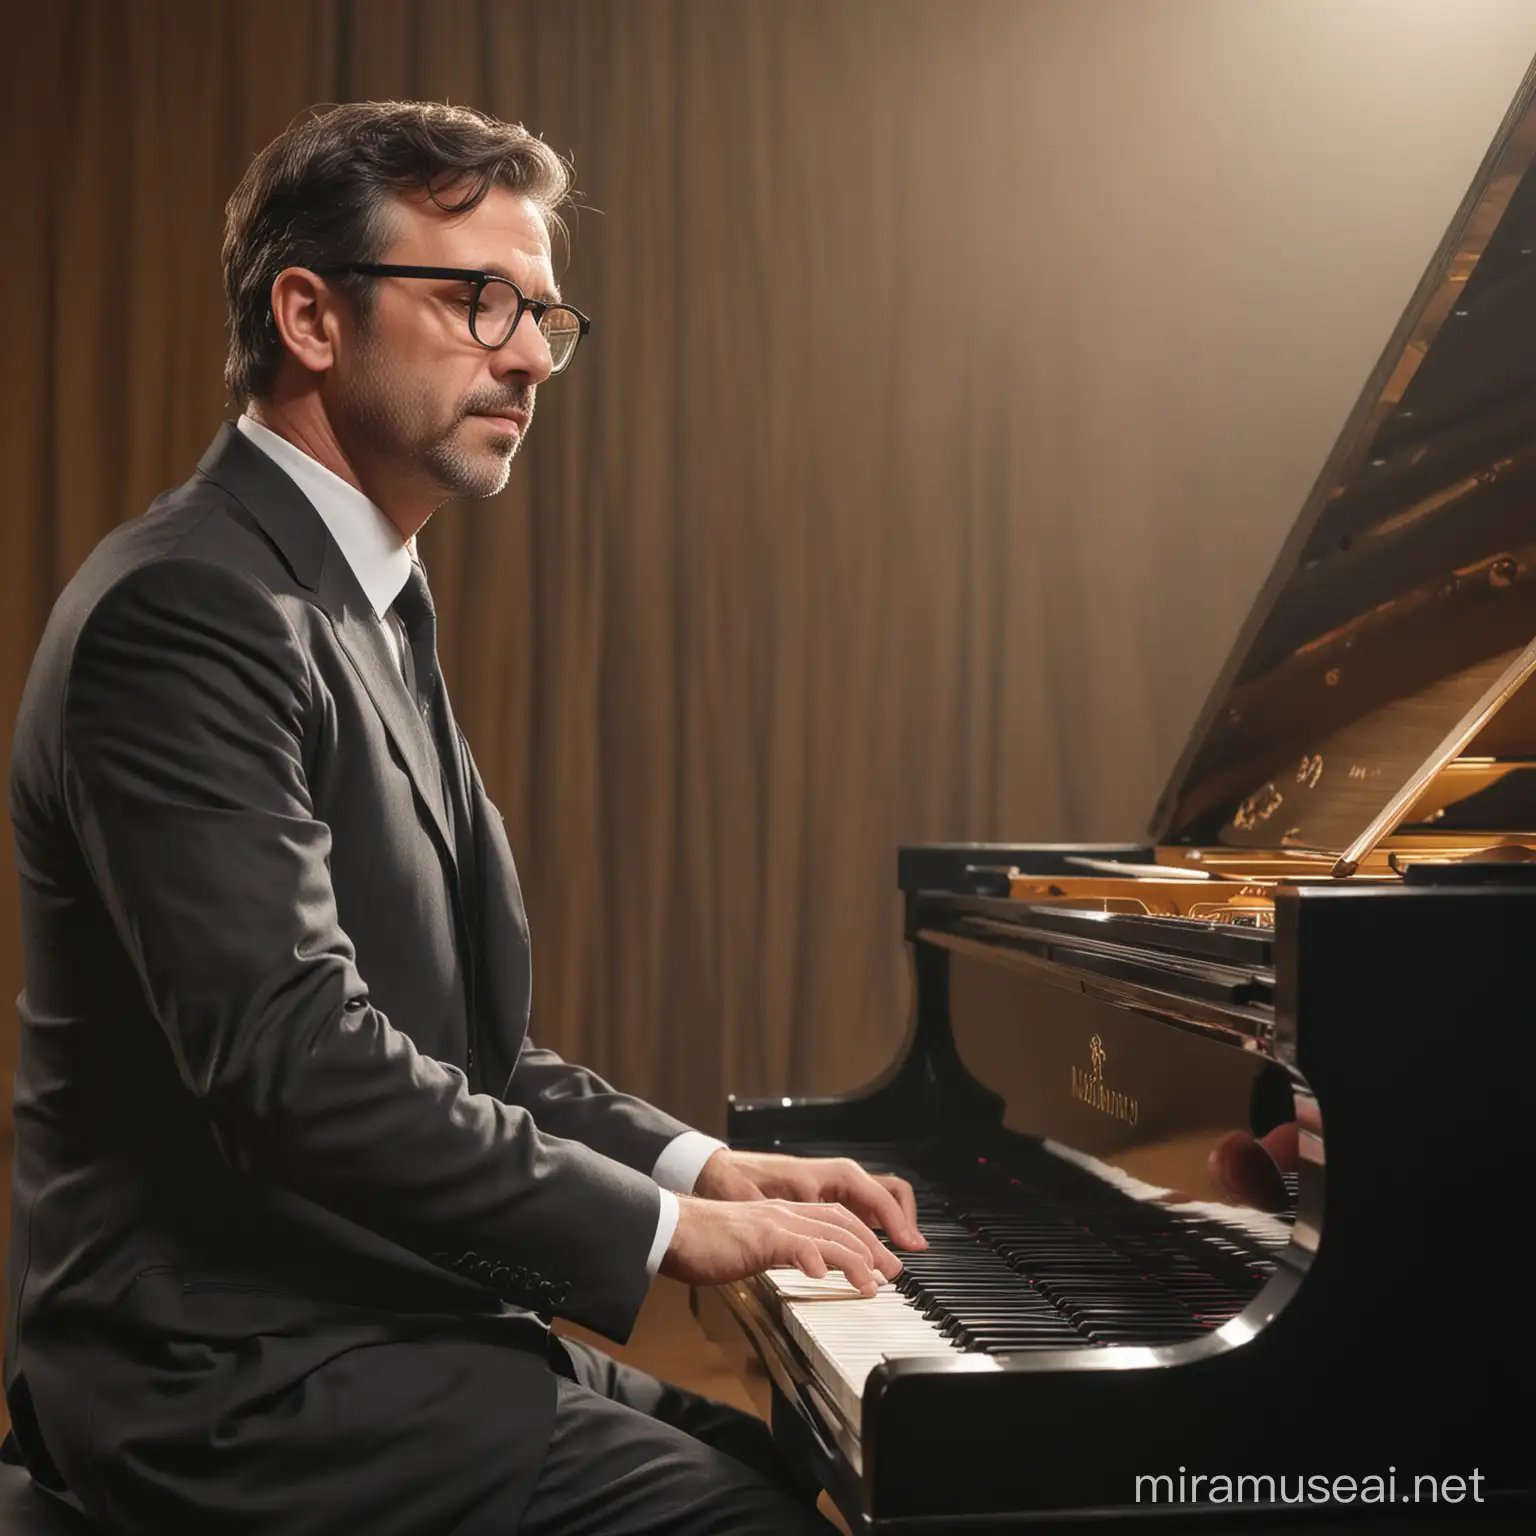 46YearOld Handsome Man Playing Grand Piano on Stage